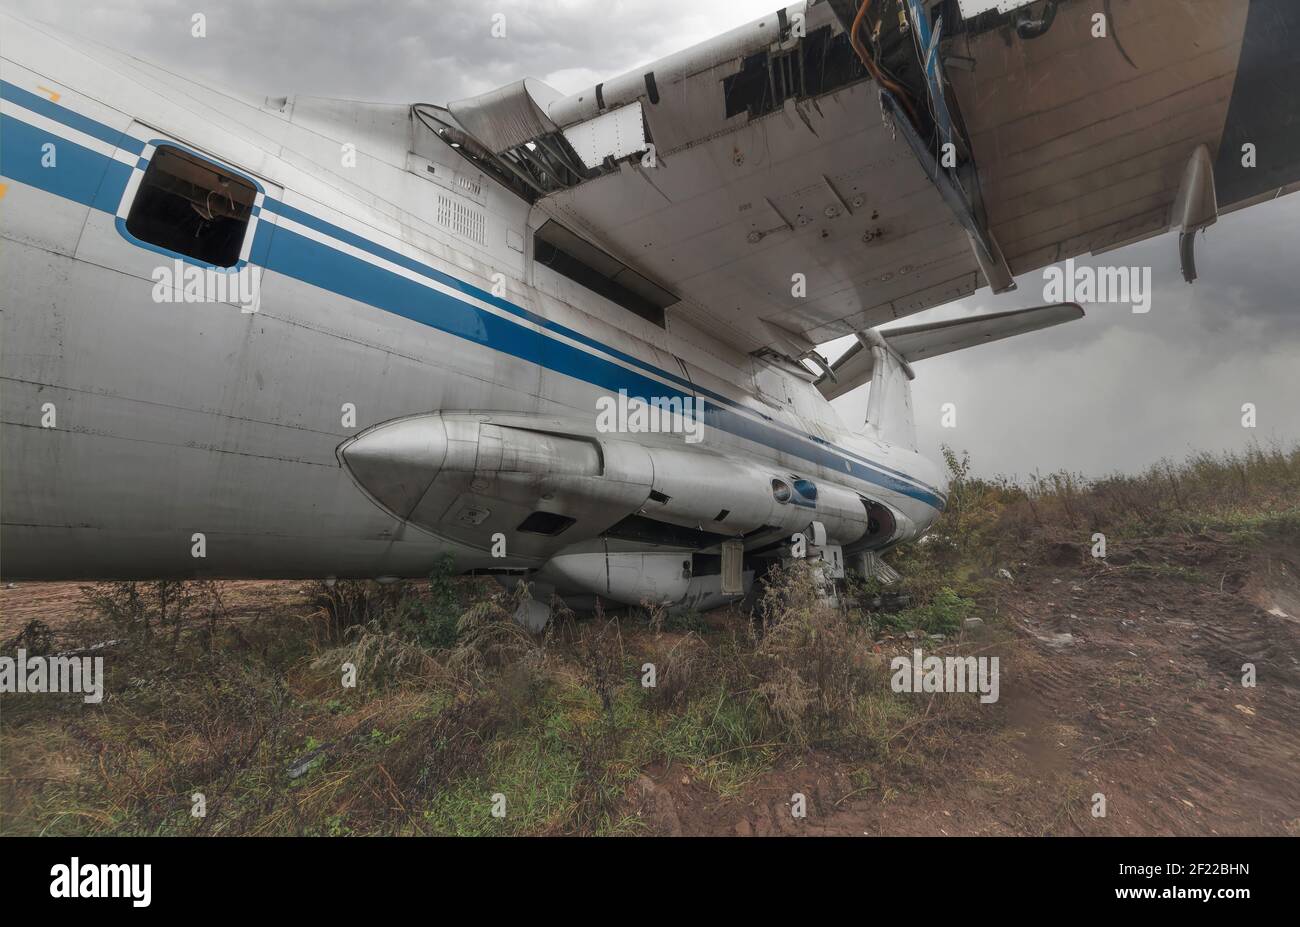 Old Soviet cargo plane IL-76 on the ground in cloudy weather Stock Photo